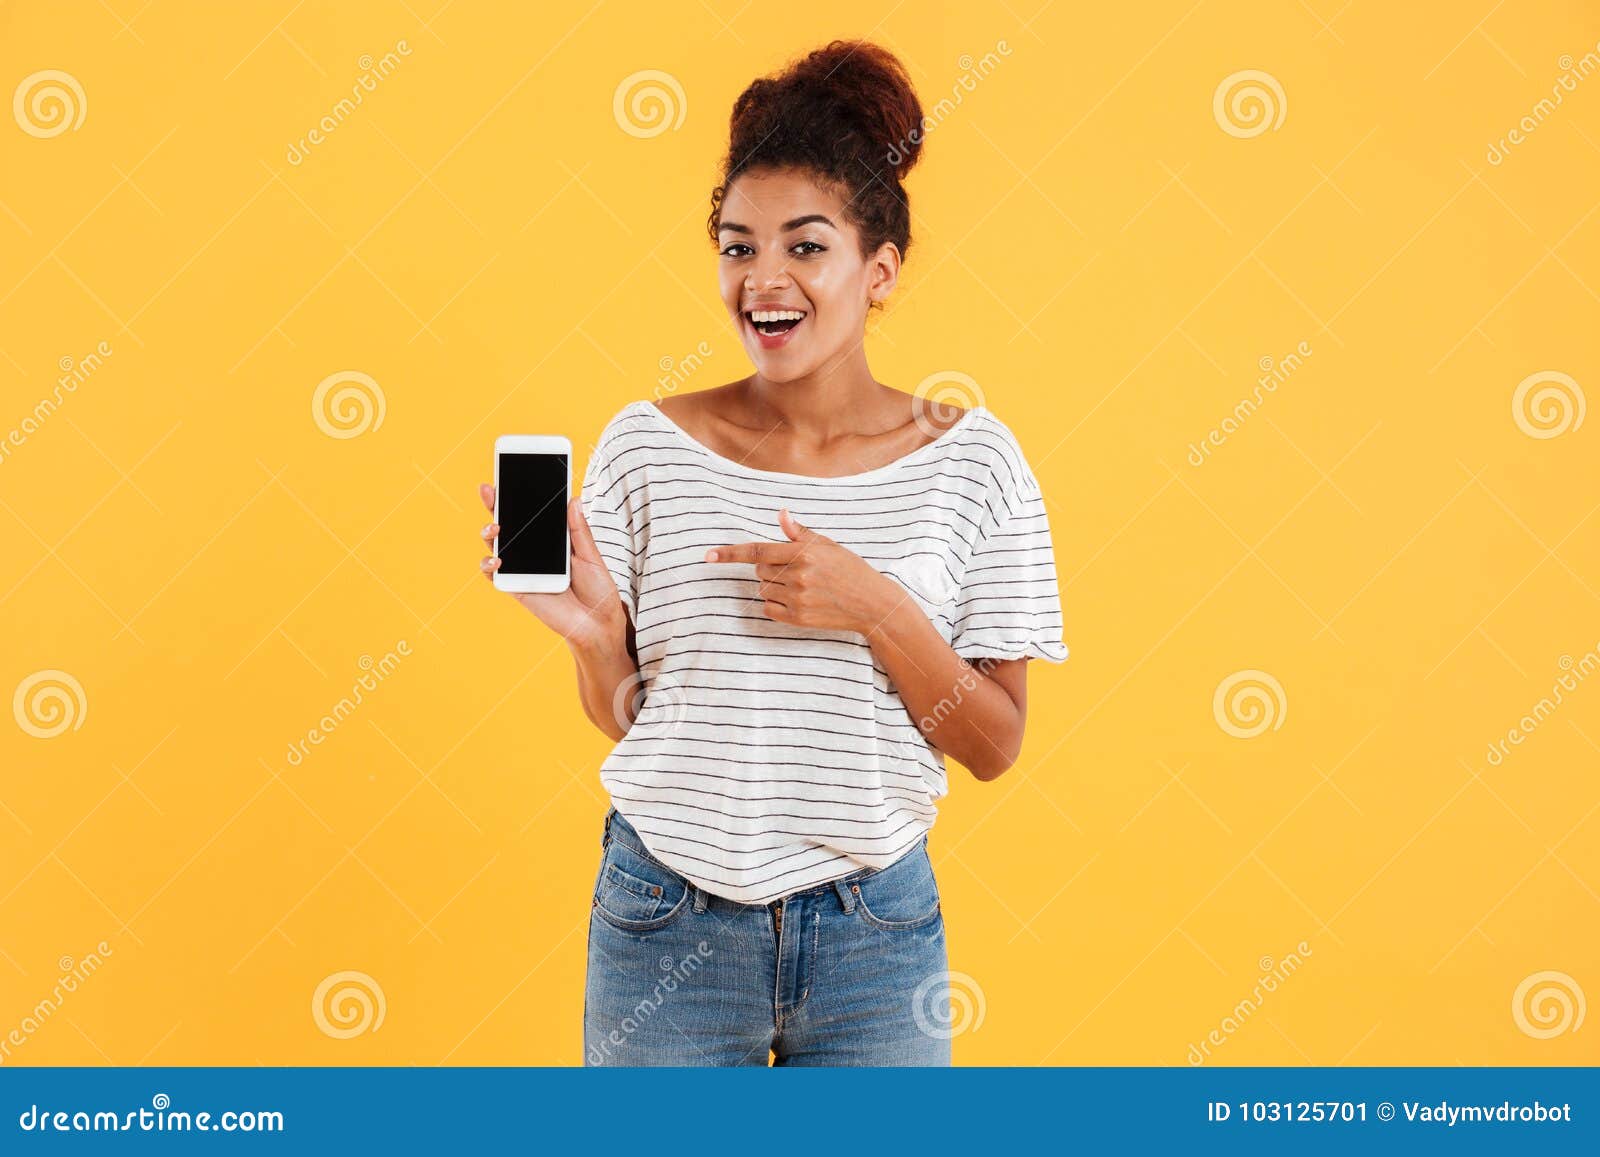 happy african lady showing smartphone with blank screen 